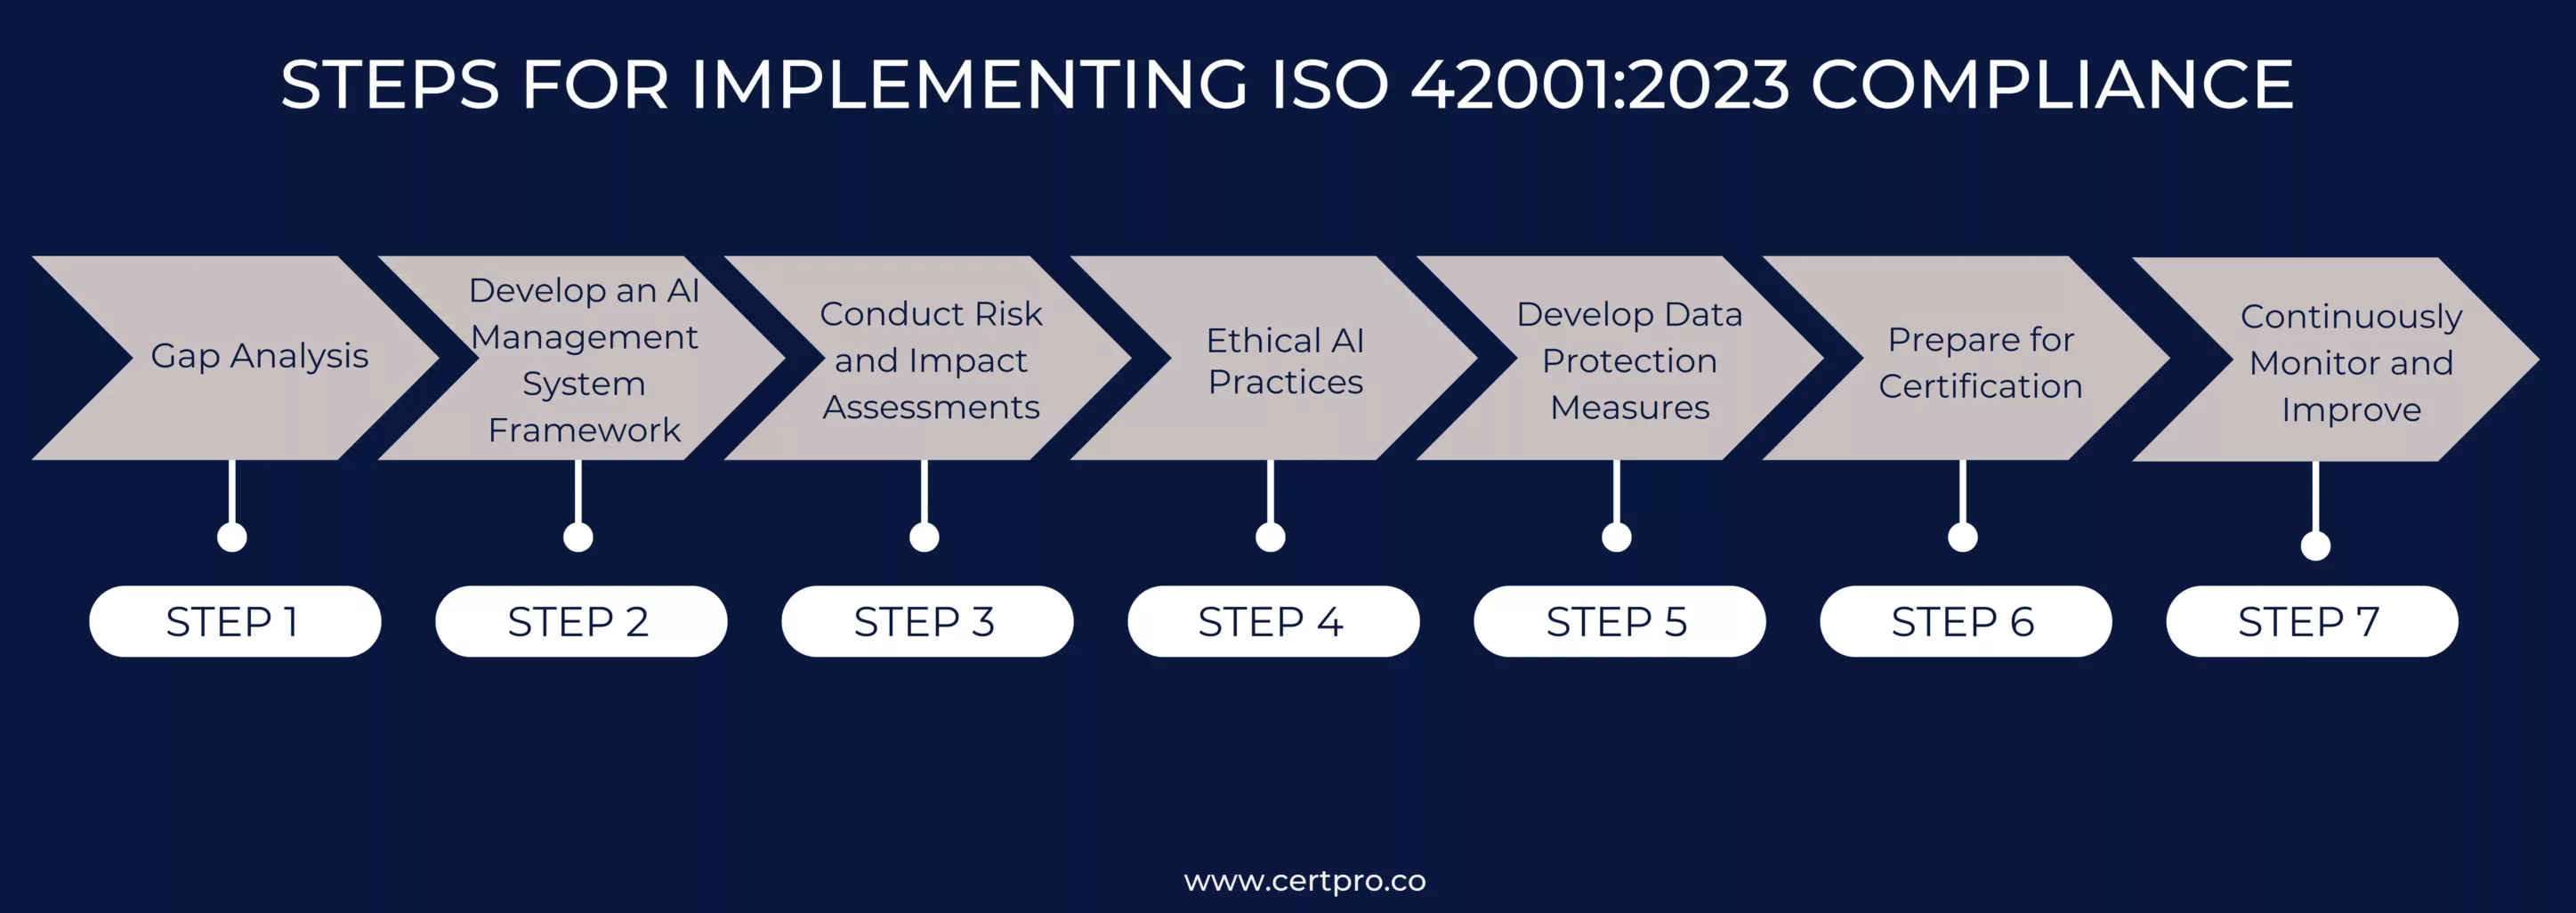 STEPS FOR IMPLEMENTING ISO 420012023 COMPLIANCE